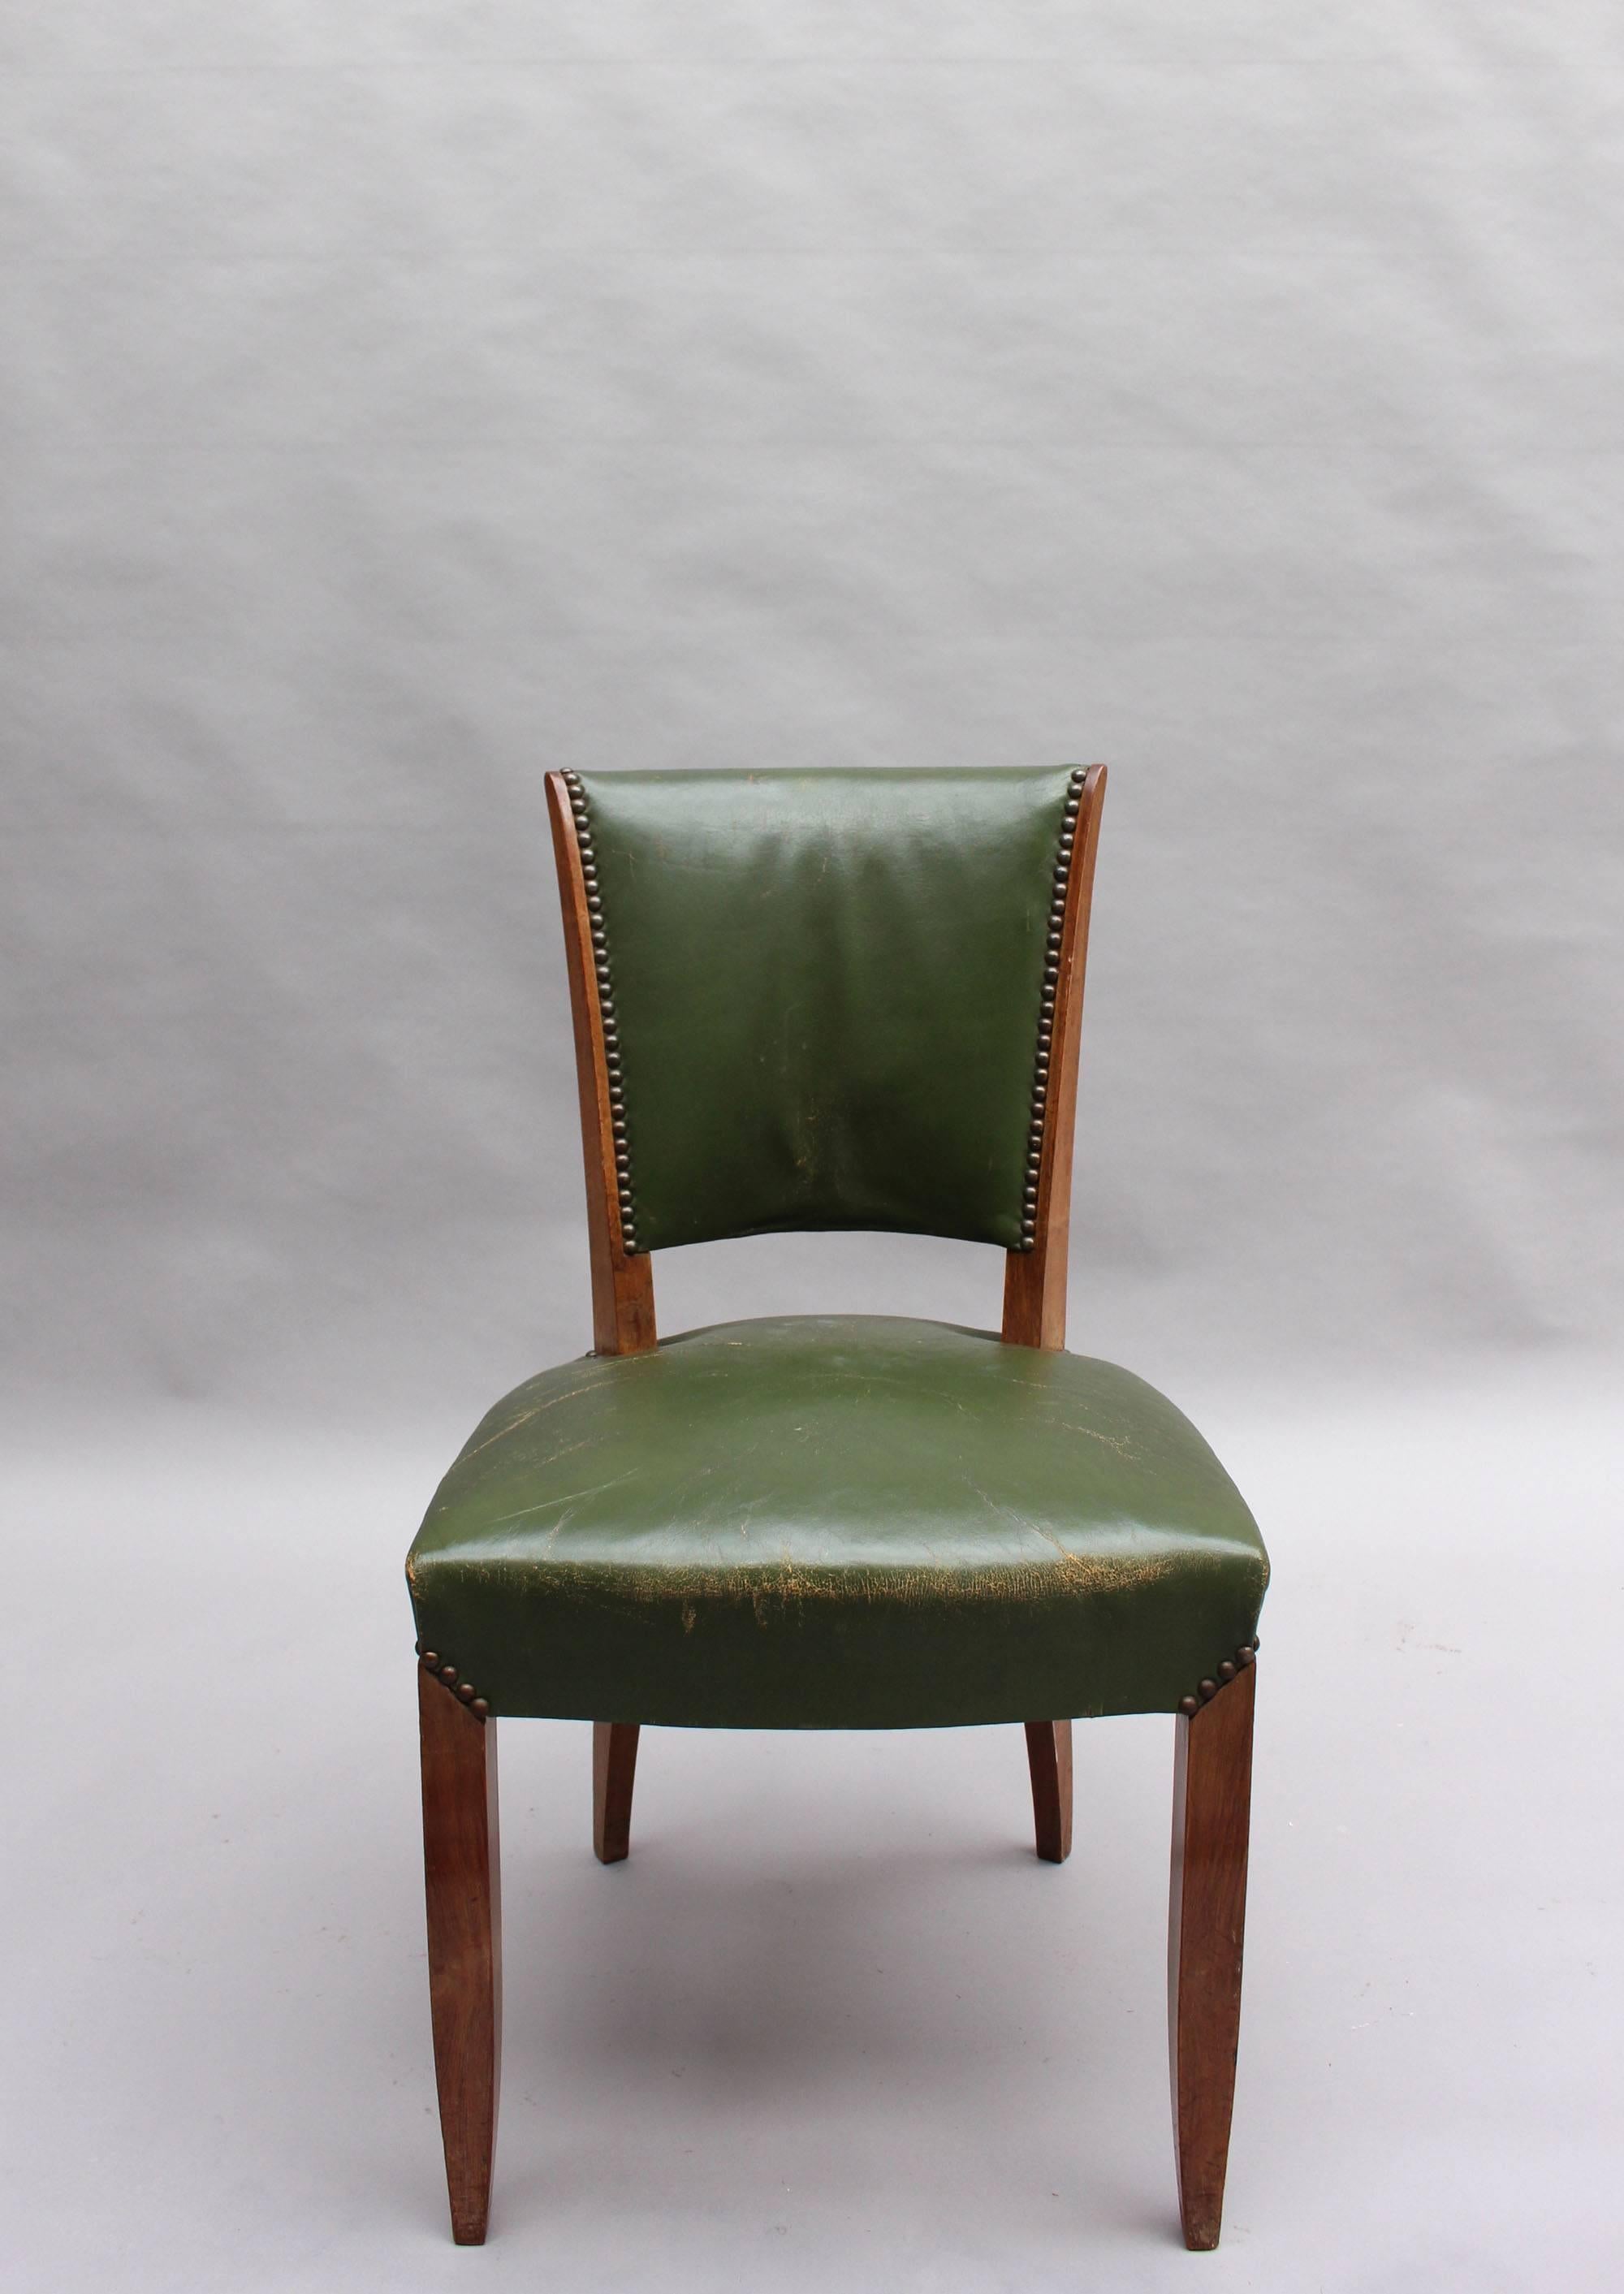 A set of four fine French Art Deco rosewood dining/side chairs. (Four armchairs are also available, see last pictures)